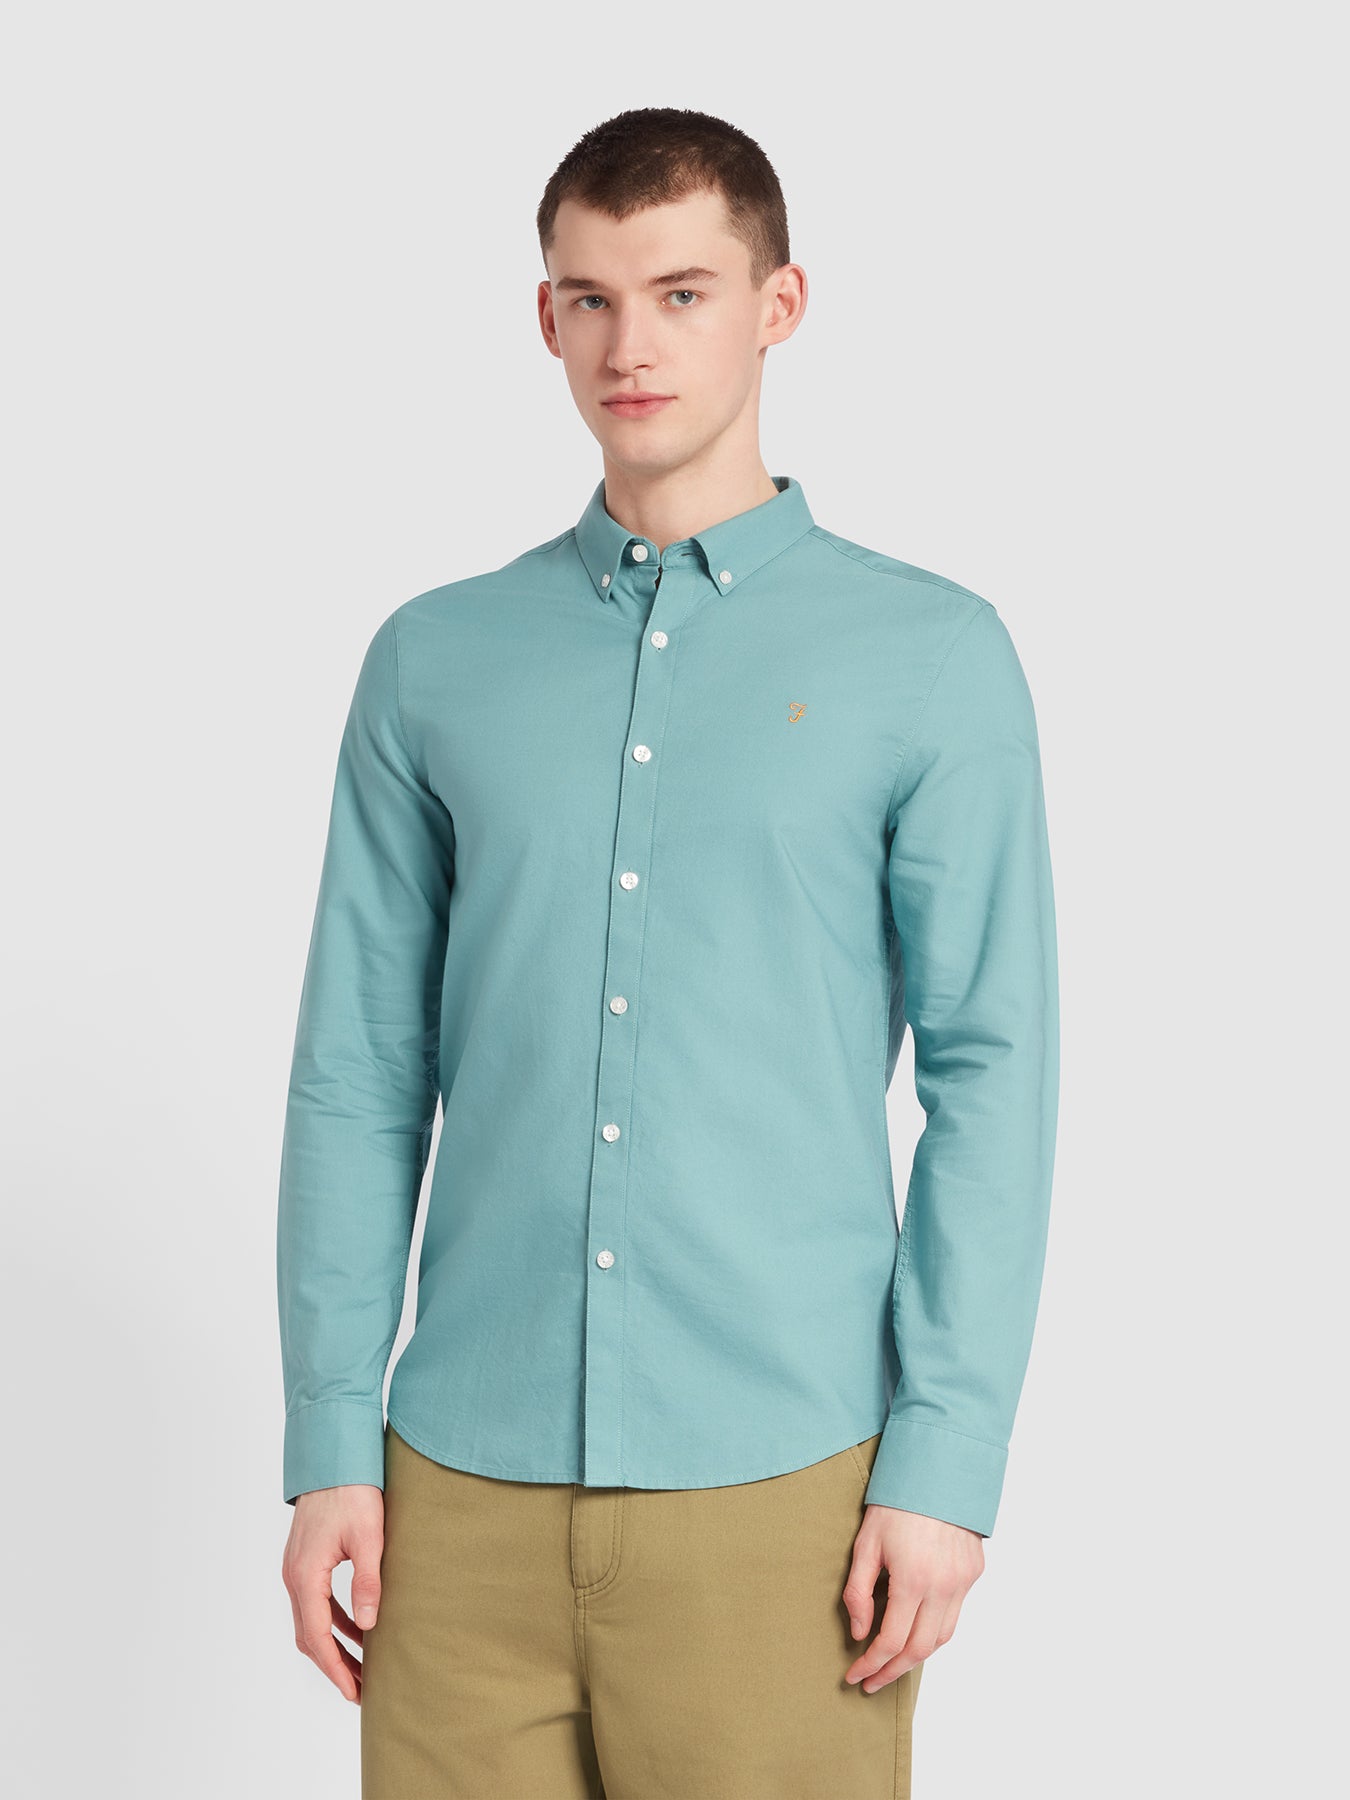 View Brewer Slim Fit Organic Cotton Long Sleeve Shirt In Brook Blue information